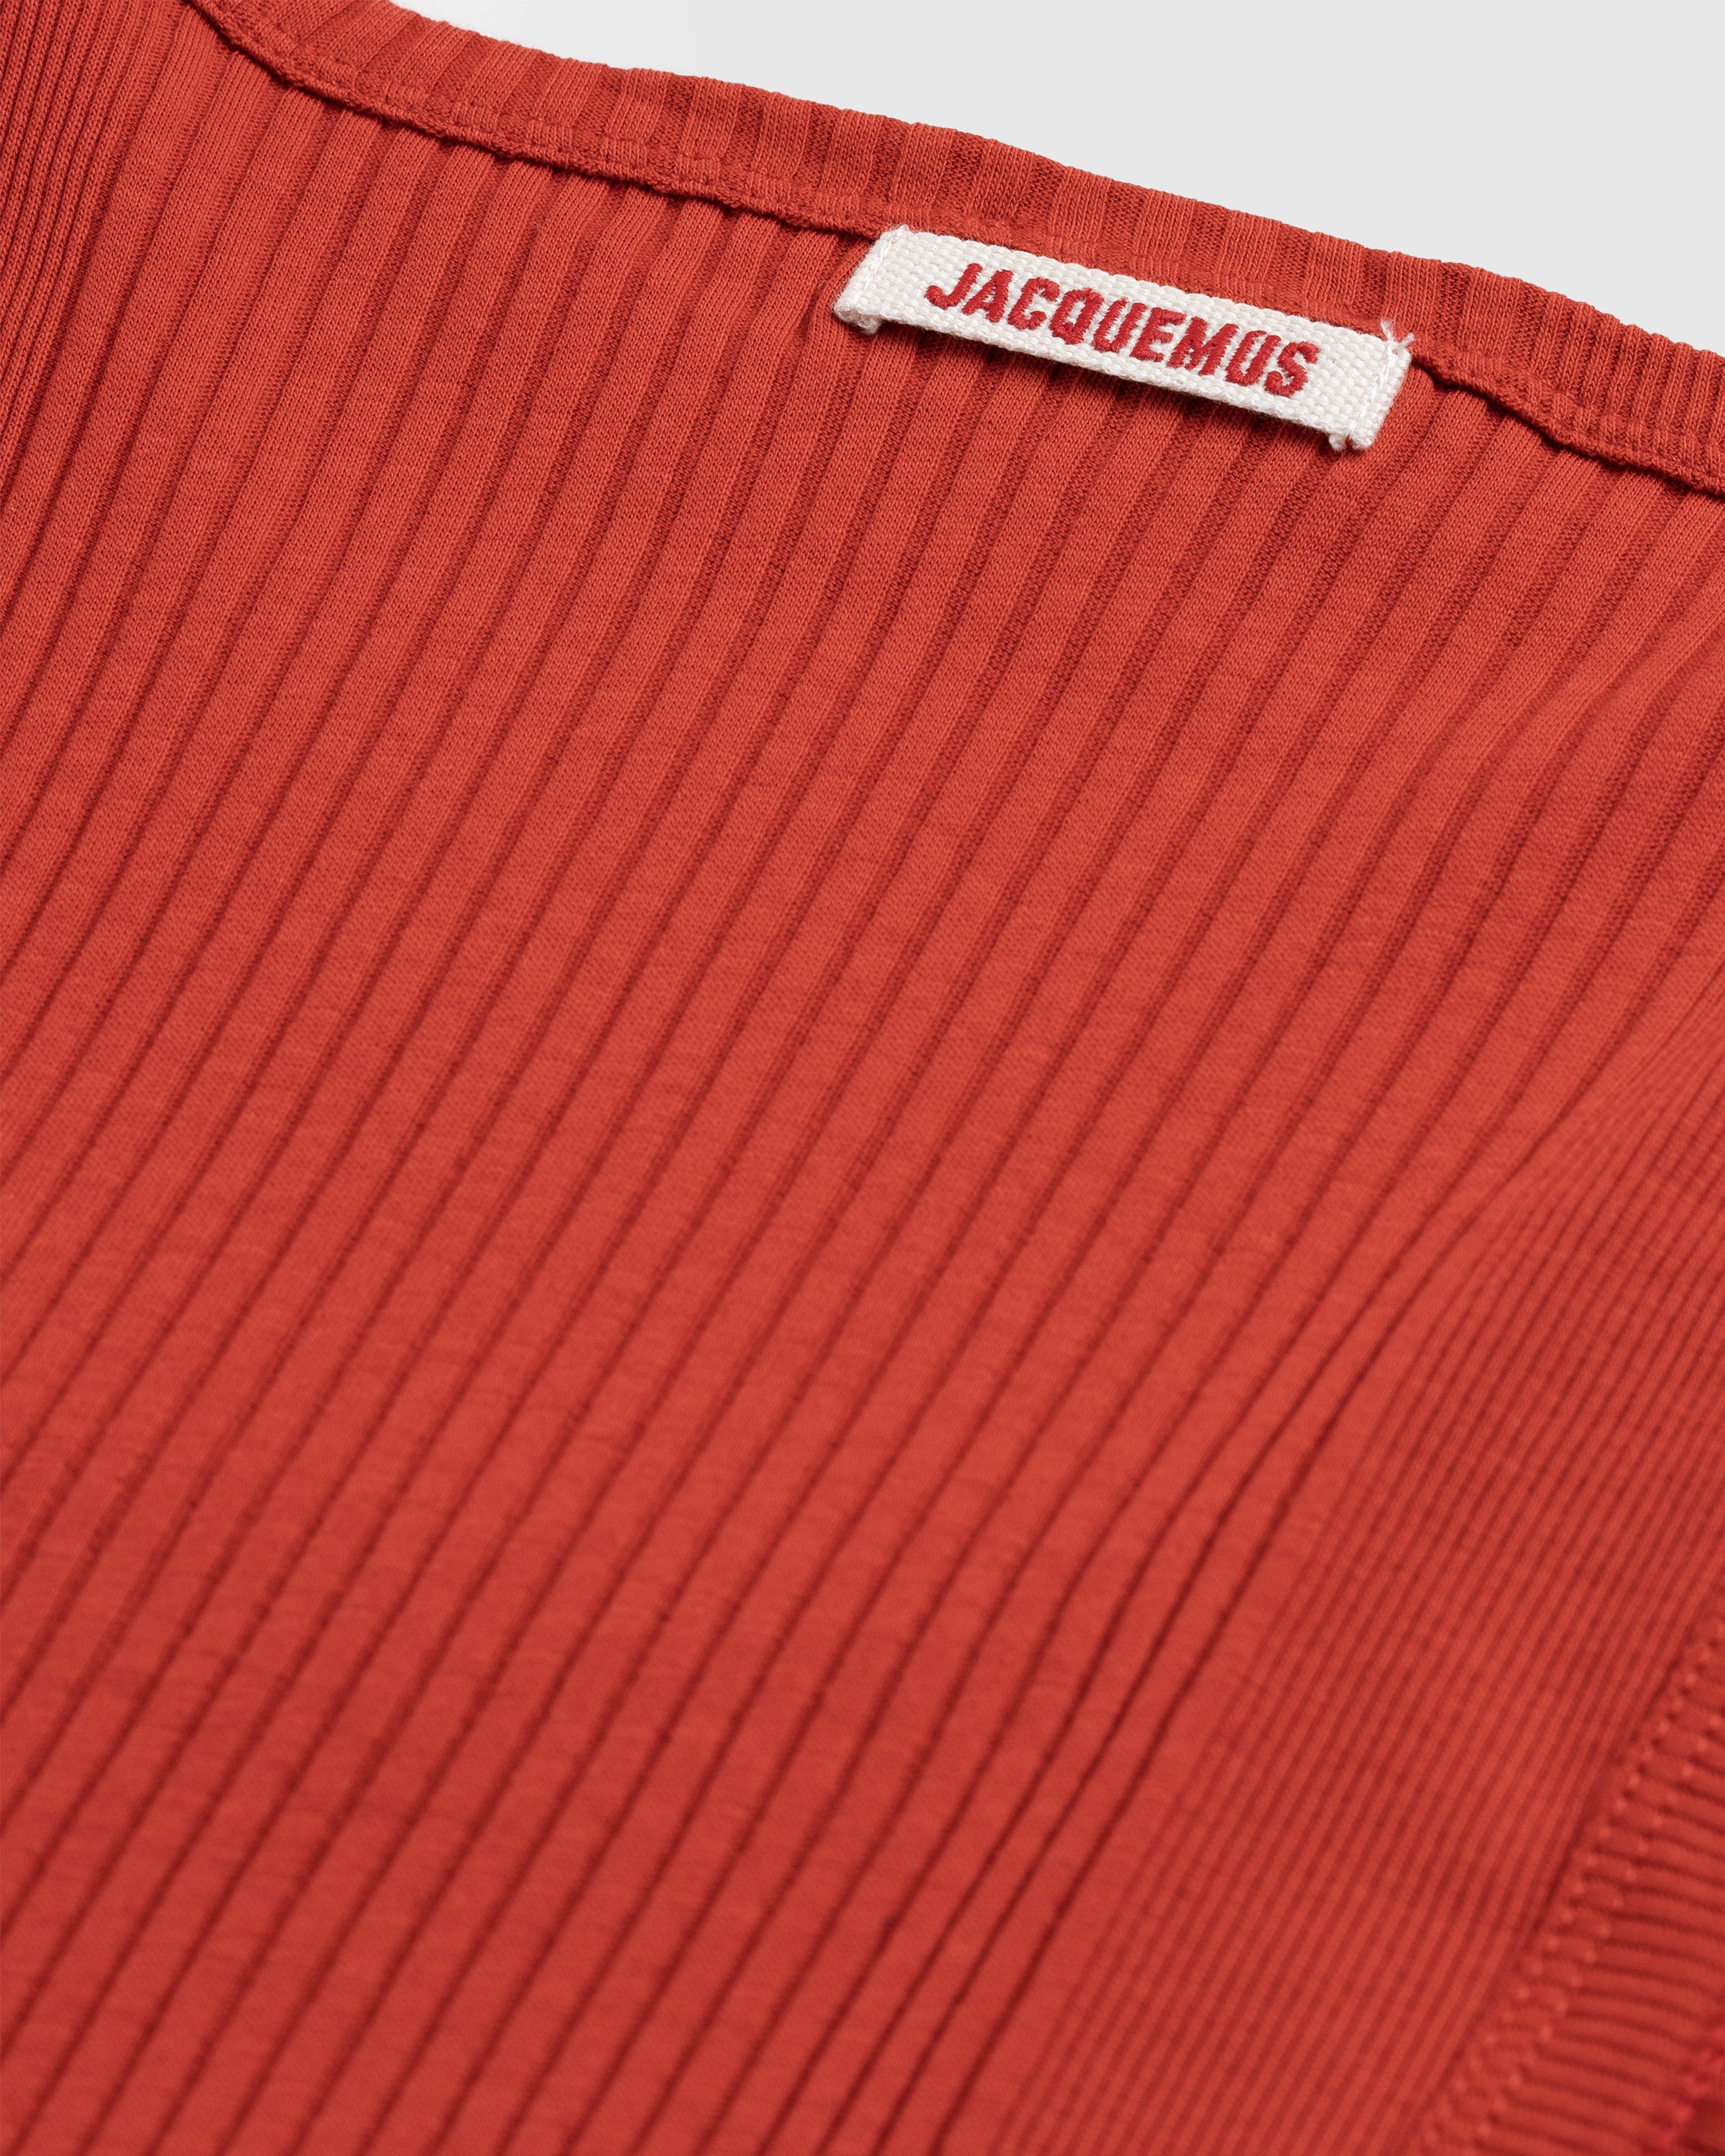 JACQUEMUS - Le Débardeur Caraco Red - Clothing - RED - Image 6